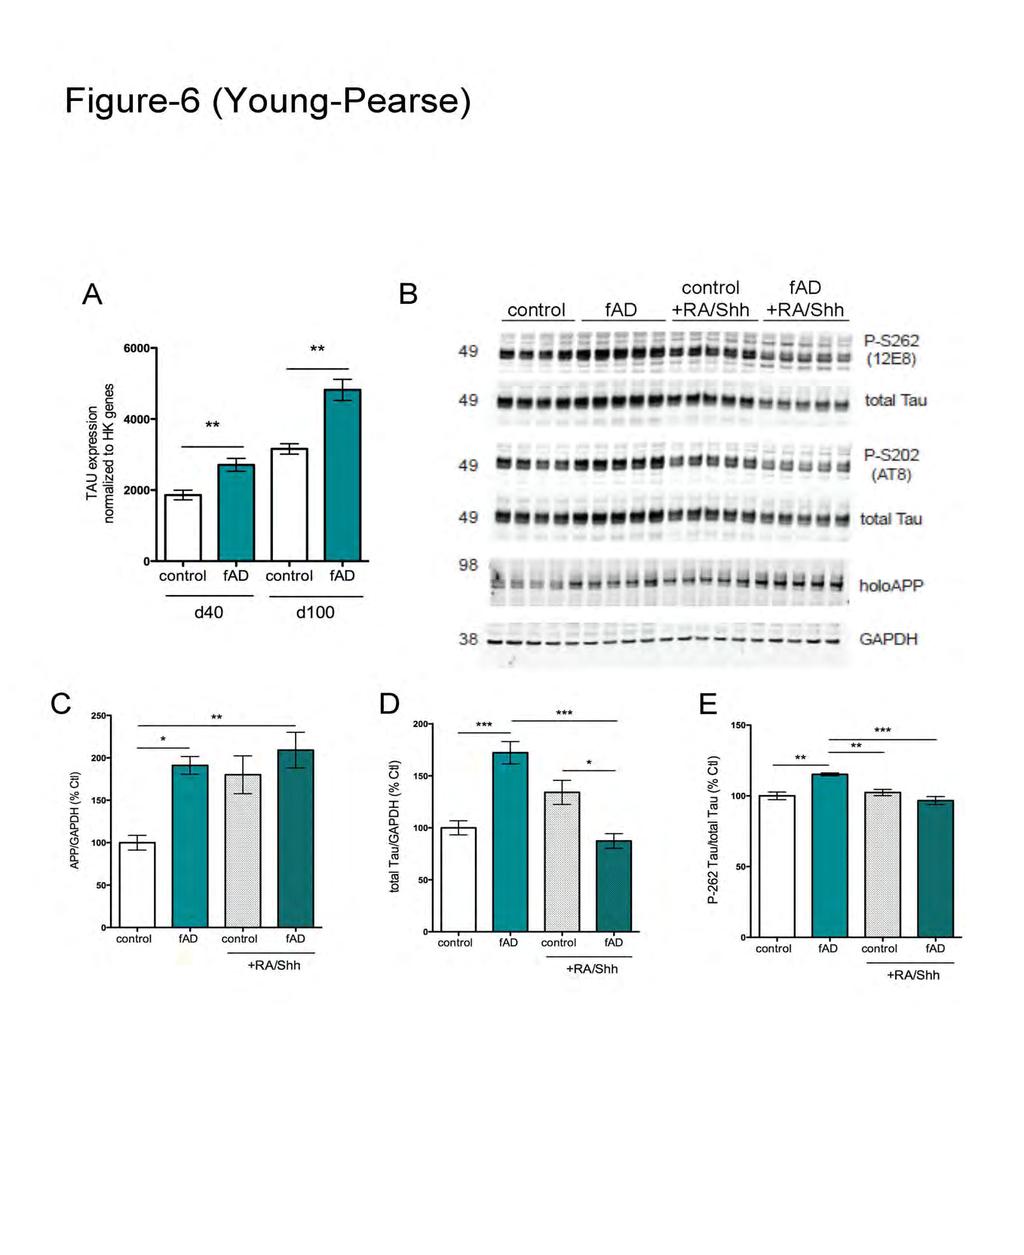 ipscs directed to a caudal neuronal fate secrete a less toxic ratio of Aβ42/40 Aβ/total RNA RA/Shh: 11 Aβ40 10 Aβ42 Aβ38 9 8 7 6 5 4 3 2 1 0 - + - + control fad Aβ 42/40 normalized to -RA/Shh for